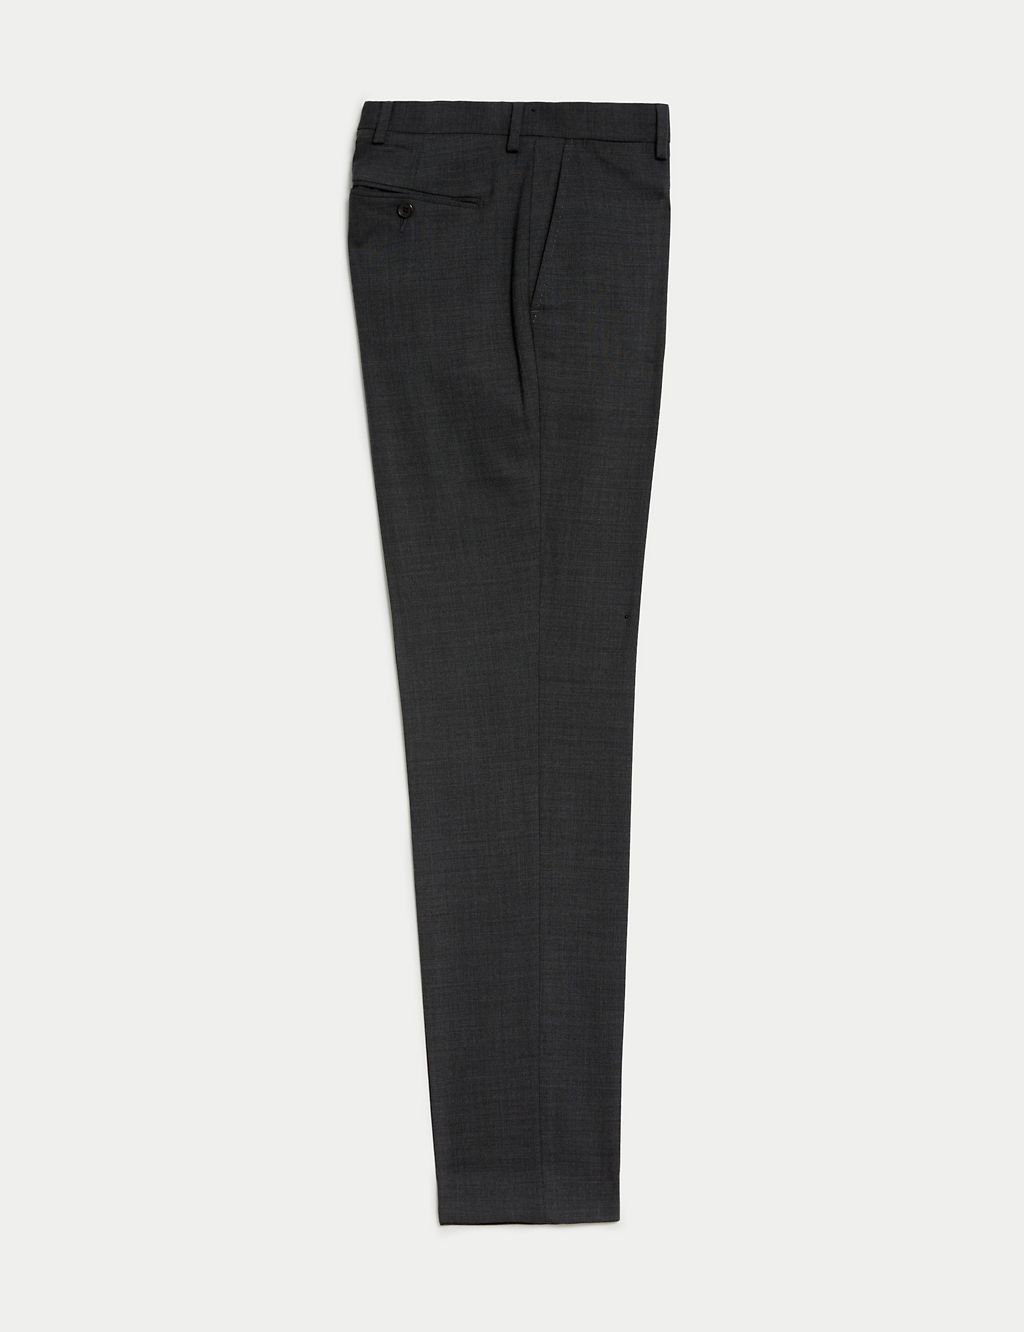 Wool Blend Flat Front Stretch Trousers 1 of 7